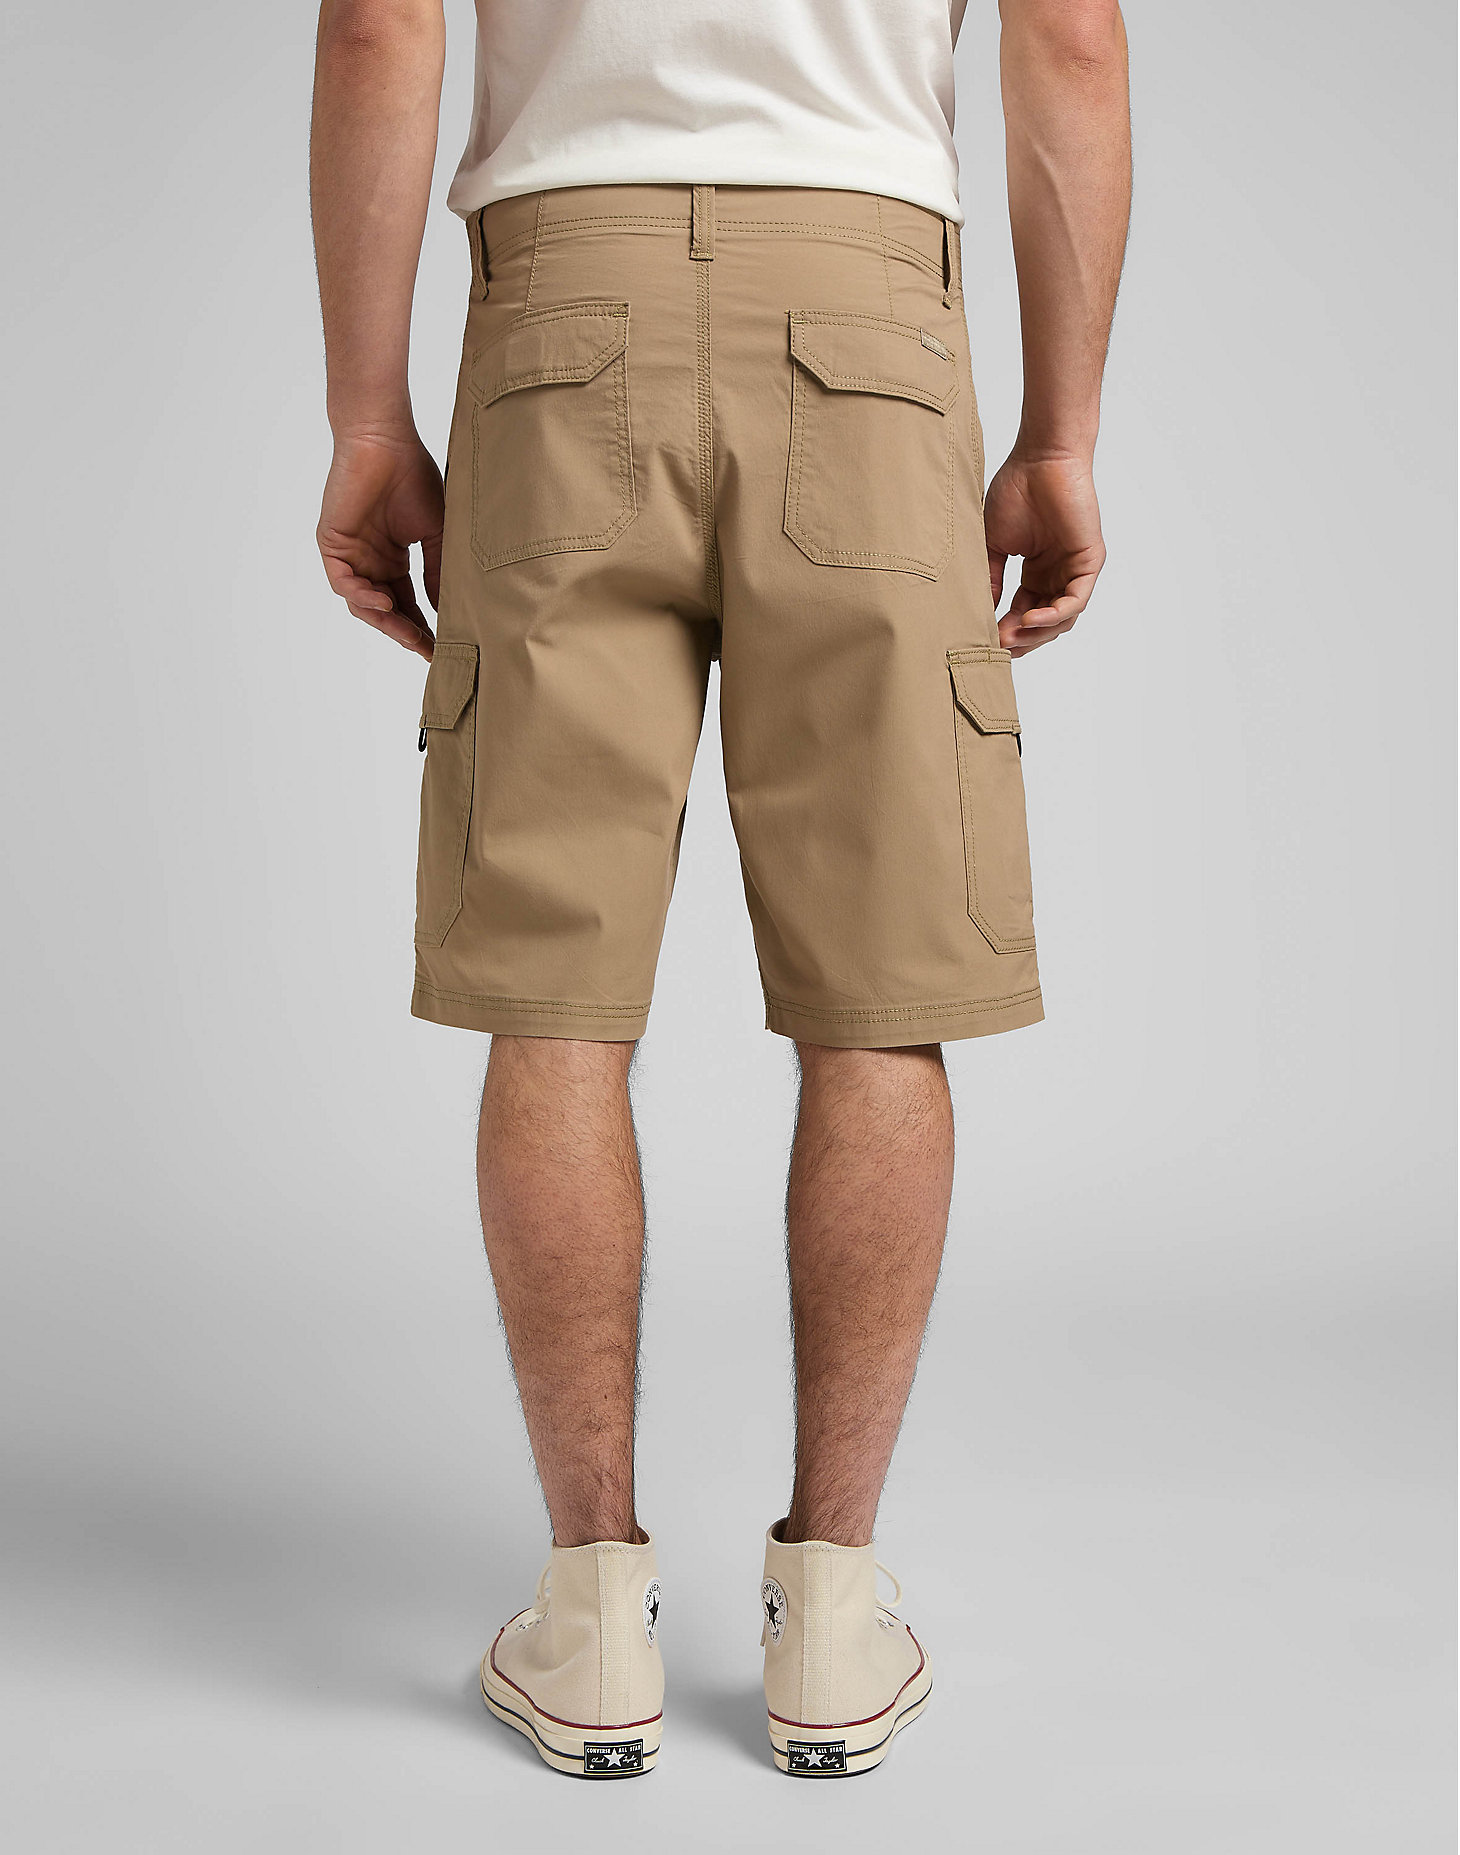 Extreme Motion Crossroad Cargo Short in Nomad alternative view 1